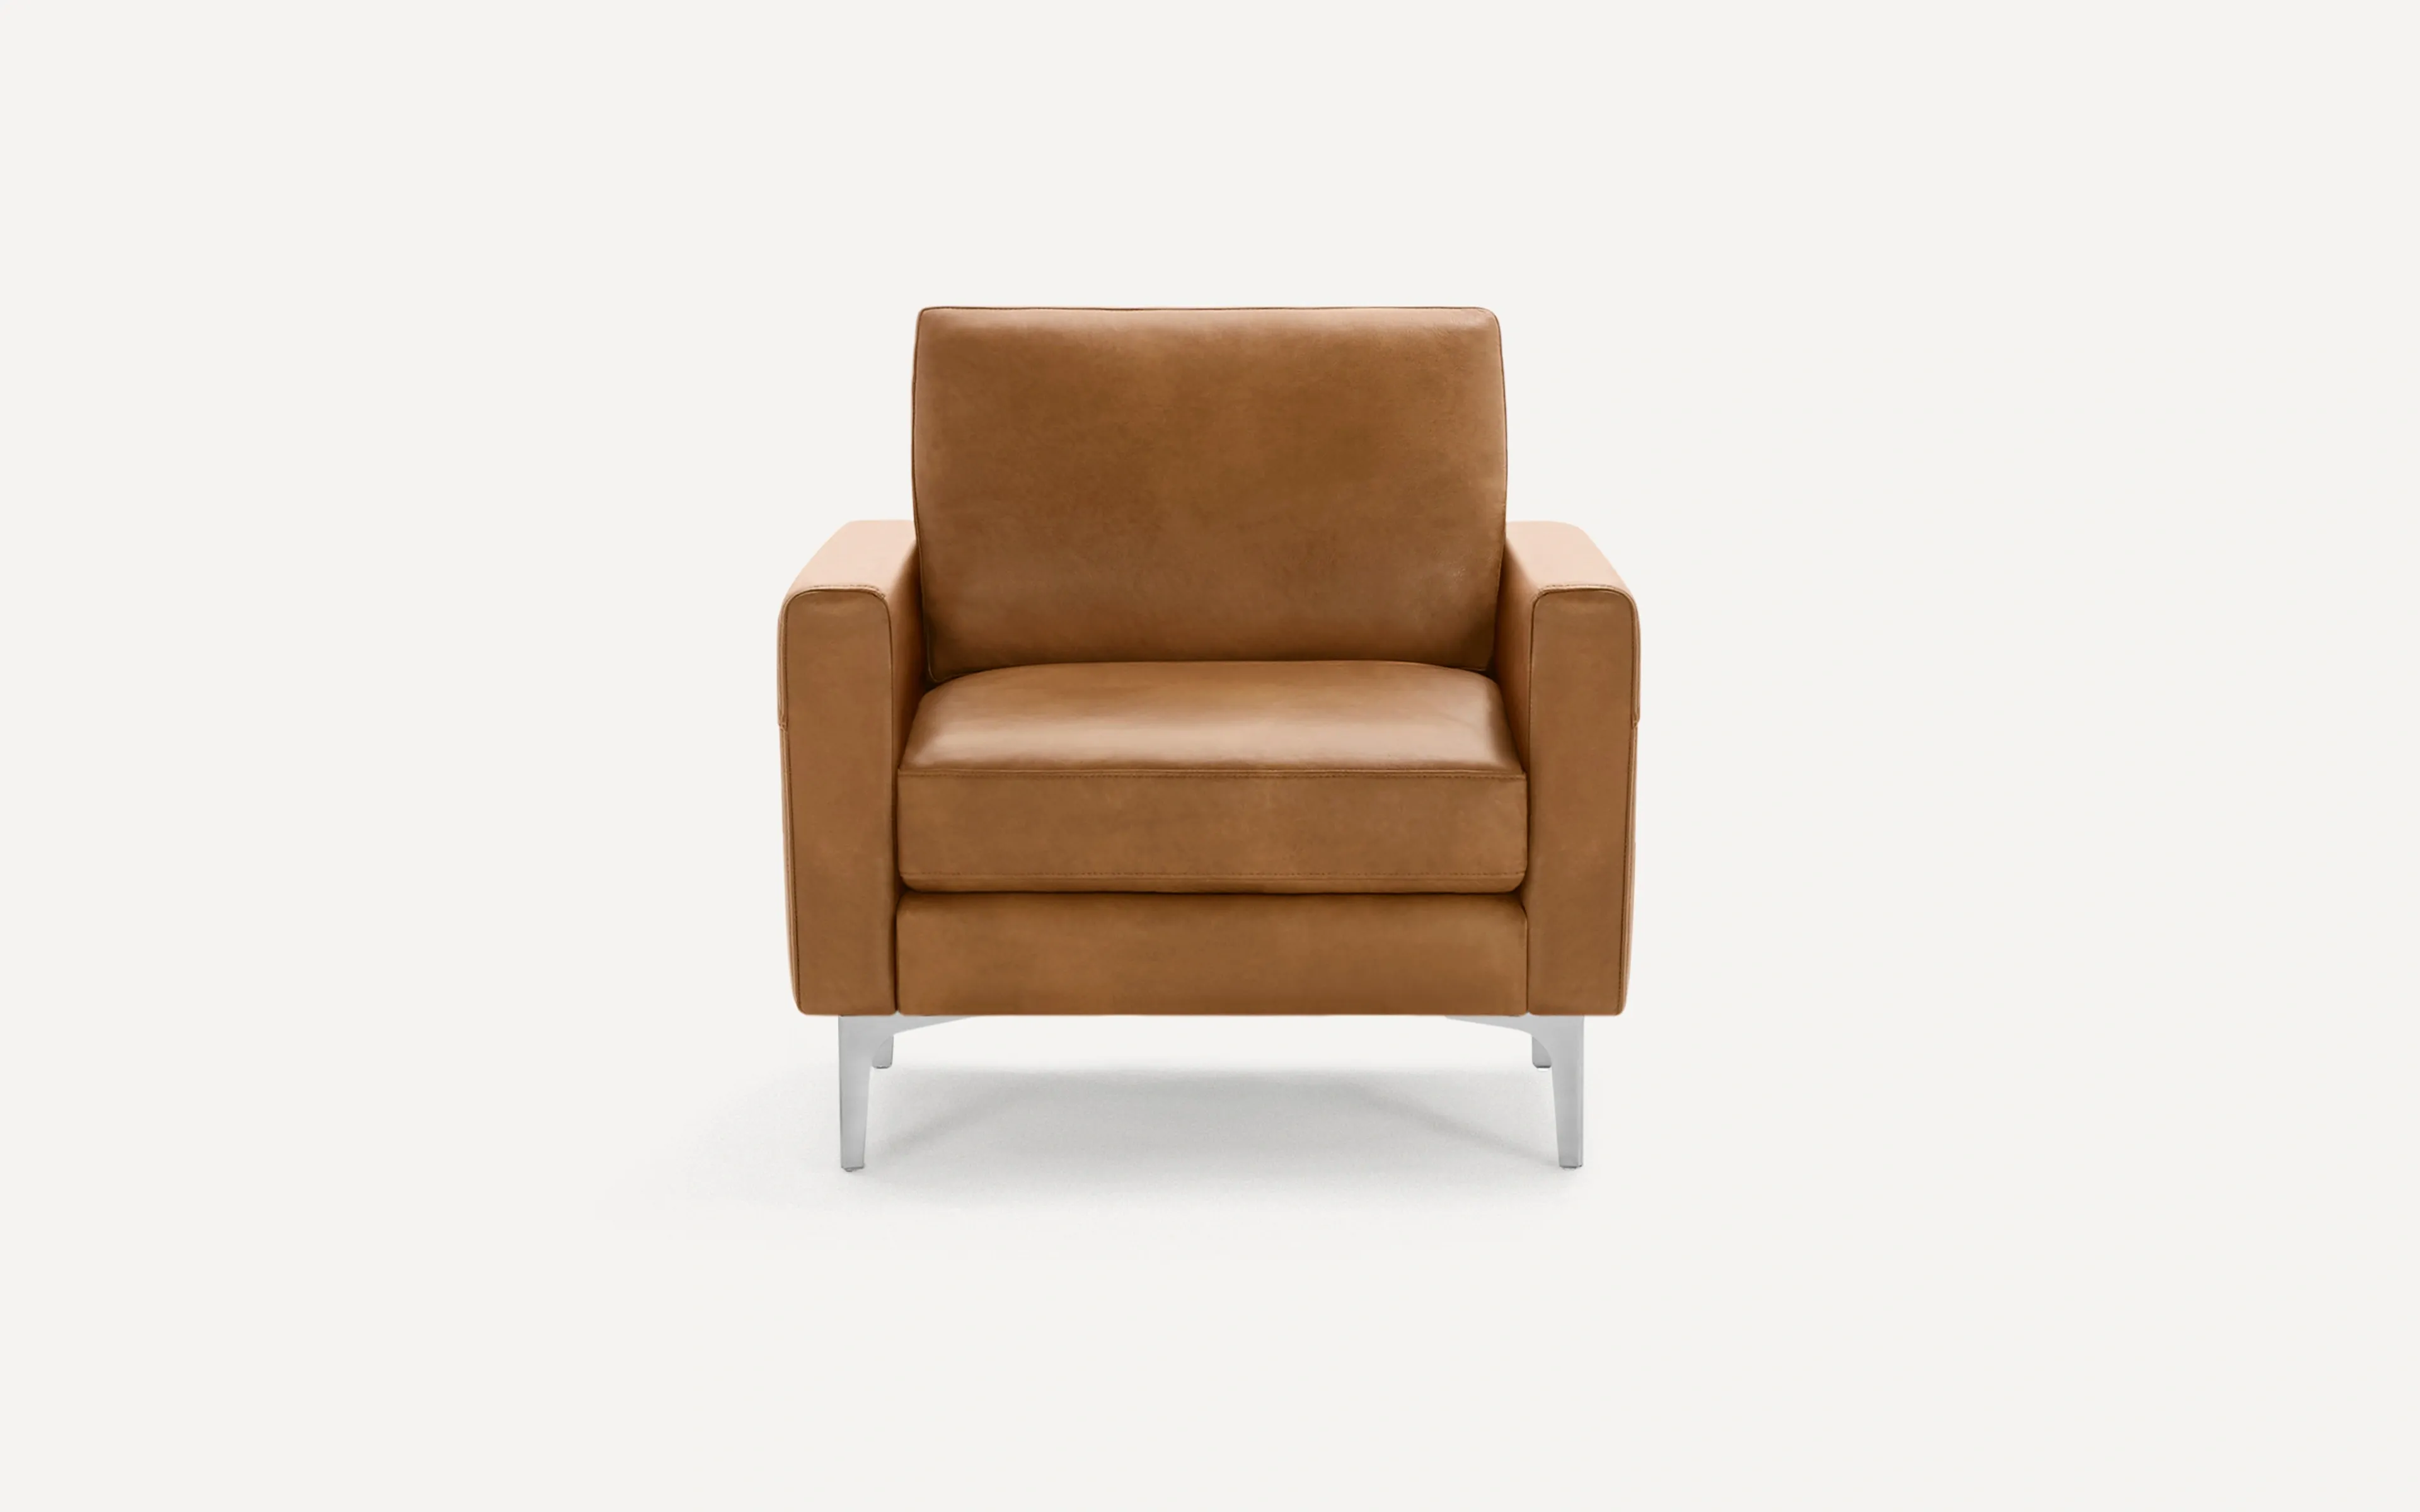 Original Nomad Armchair in Camel Leather